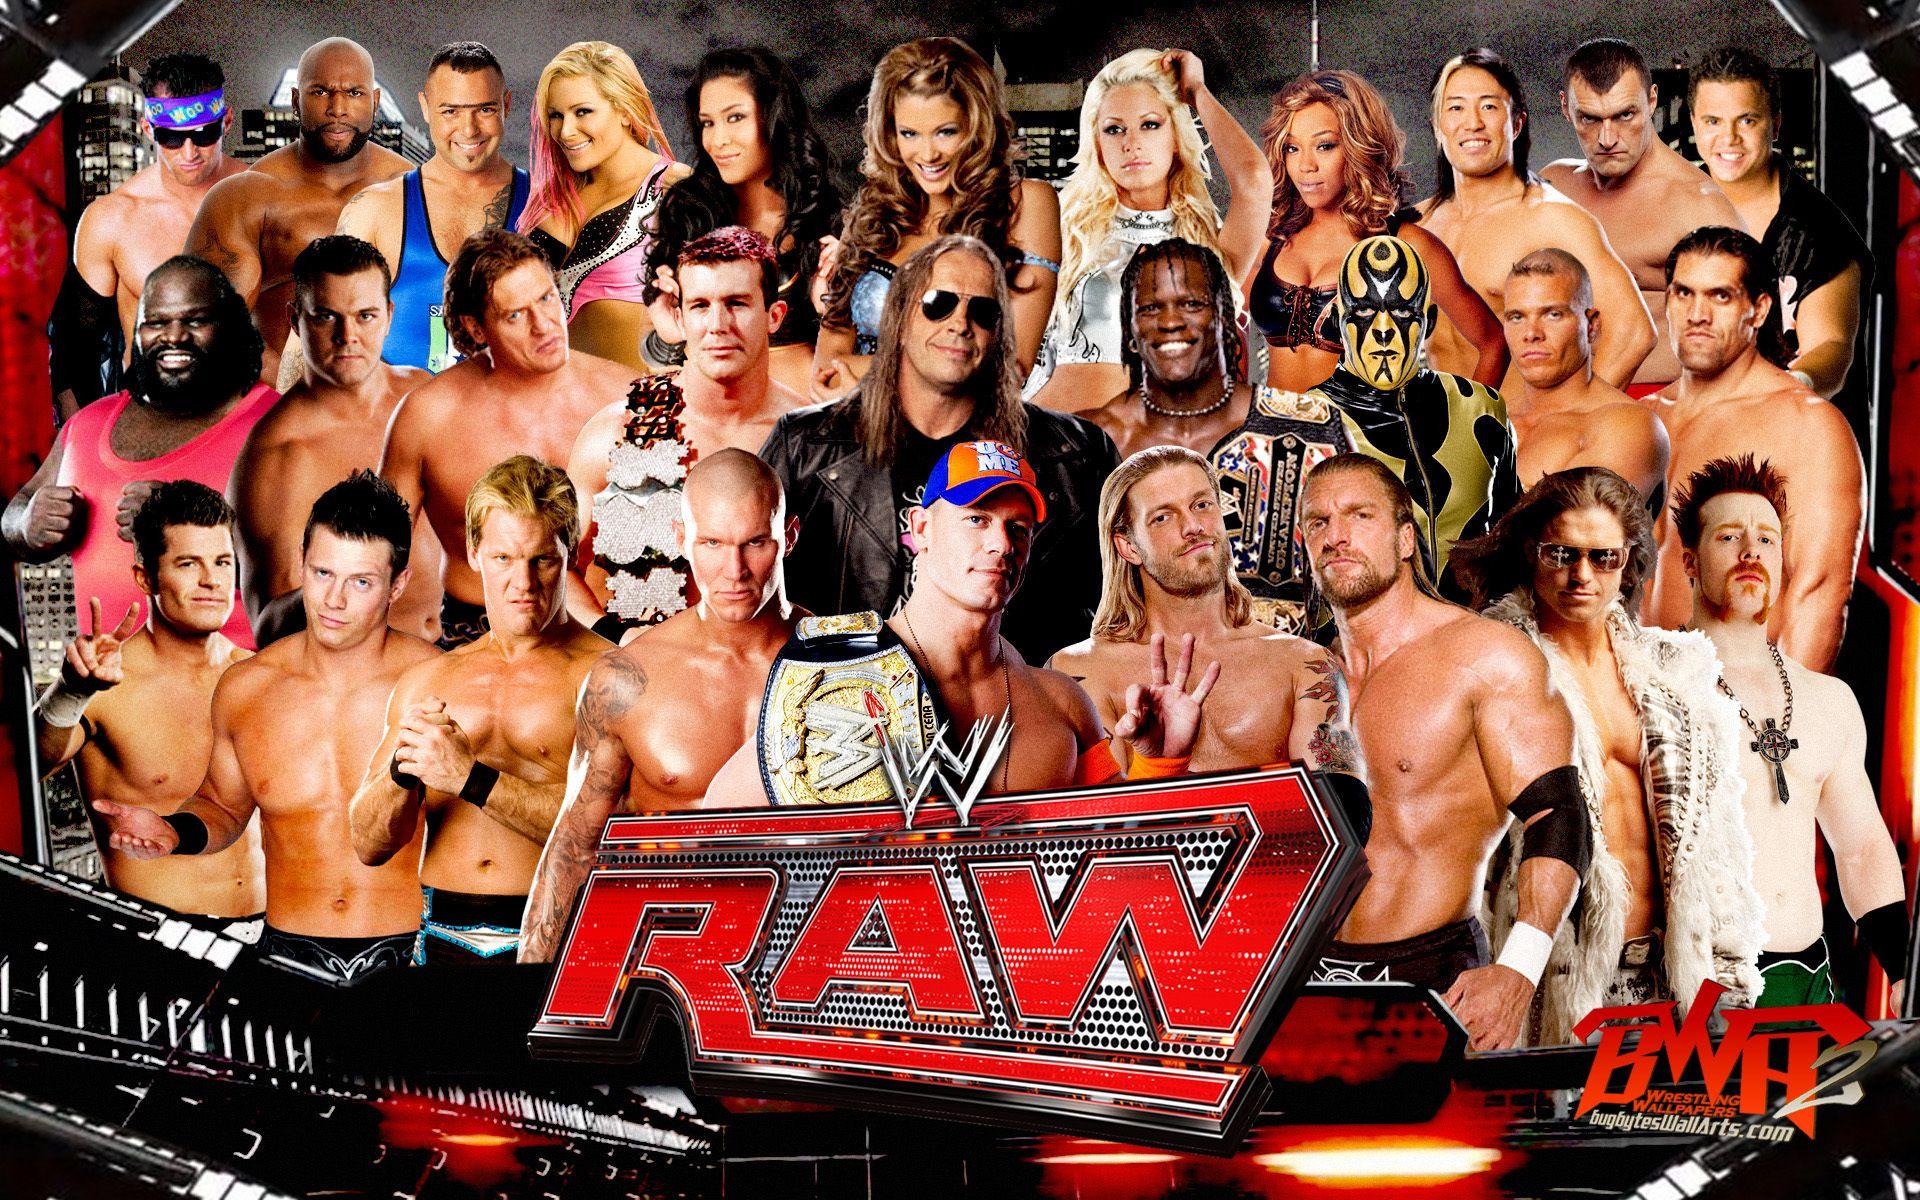 Ahead of WWE India showdown, here are the moments of Raw